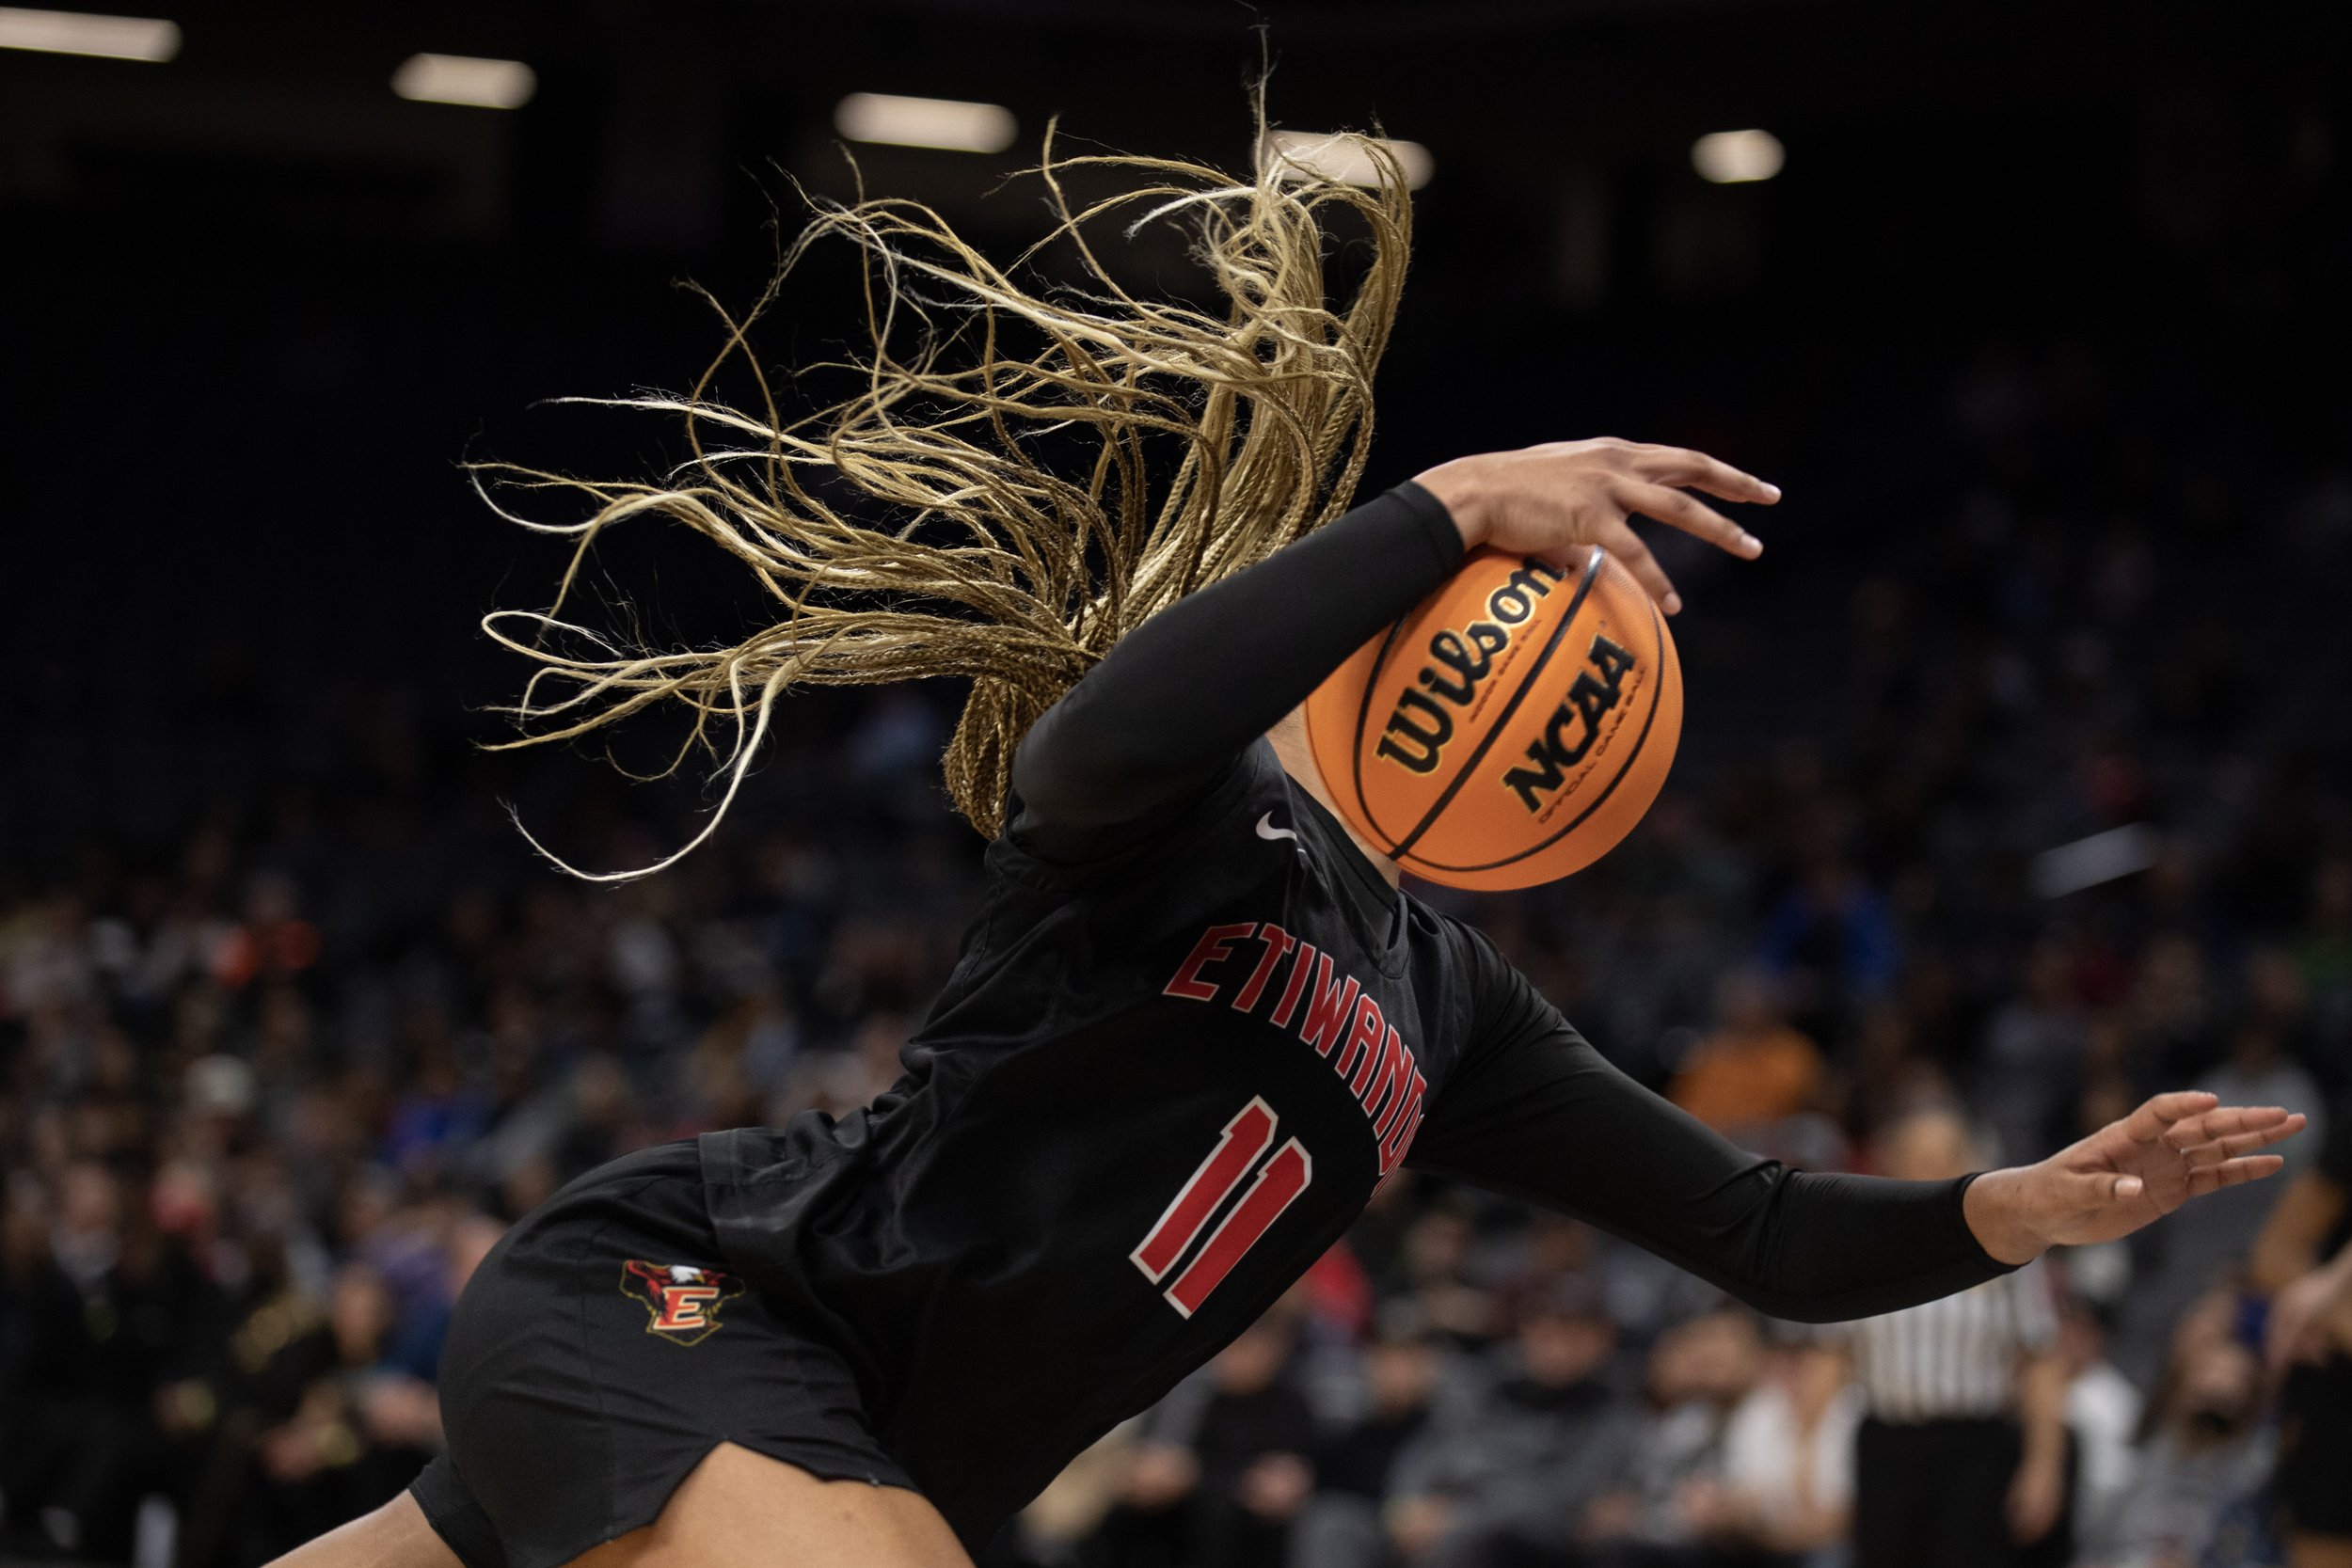  Etiwanda’s Kennedy Smith (11) falls as she is fouled driving to the basket in the Open Division Girls State Championship basketball game against Archbishop Mitty at the Golden 1 Center in Sacramento, Calif., Saturday, March 11, 2023. Etiwanda won 69